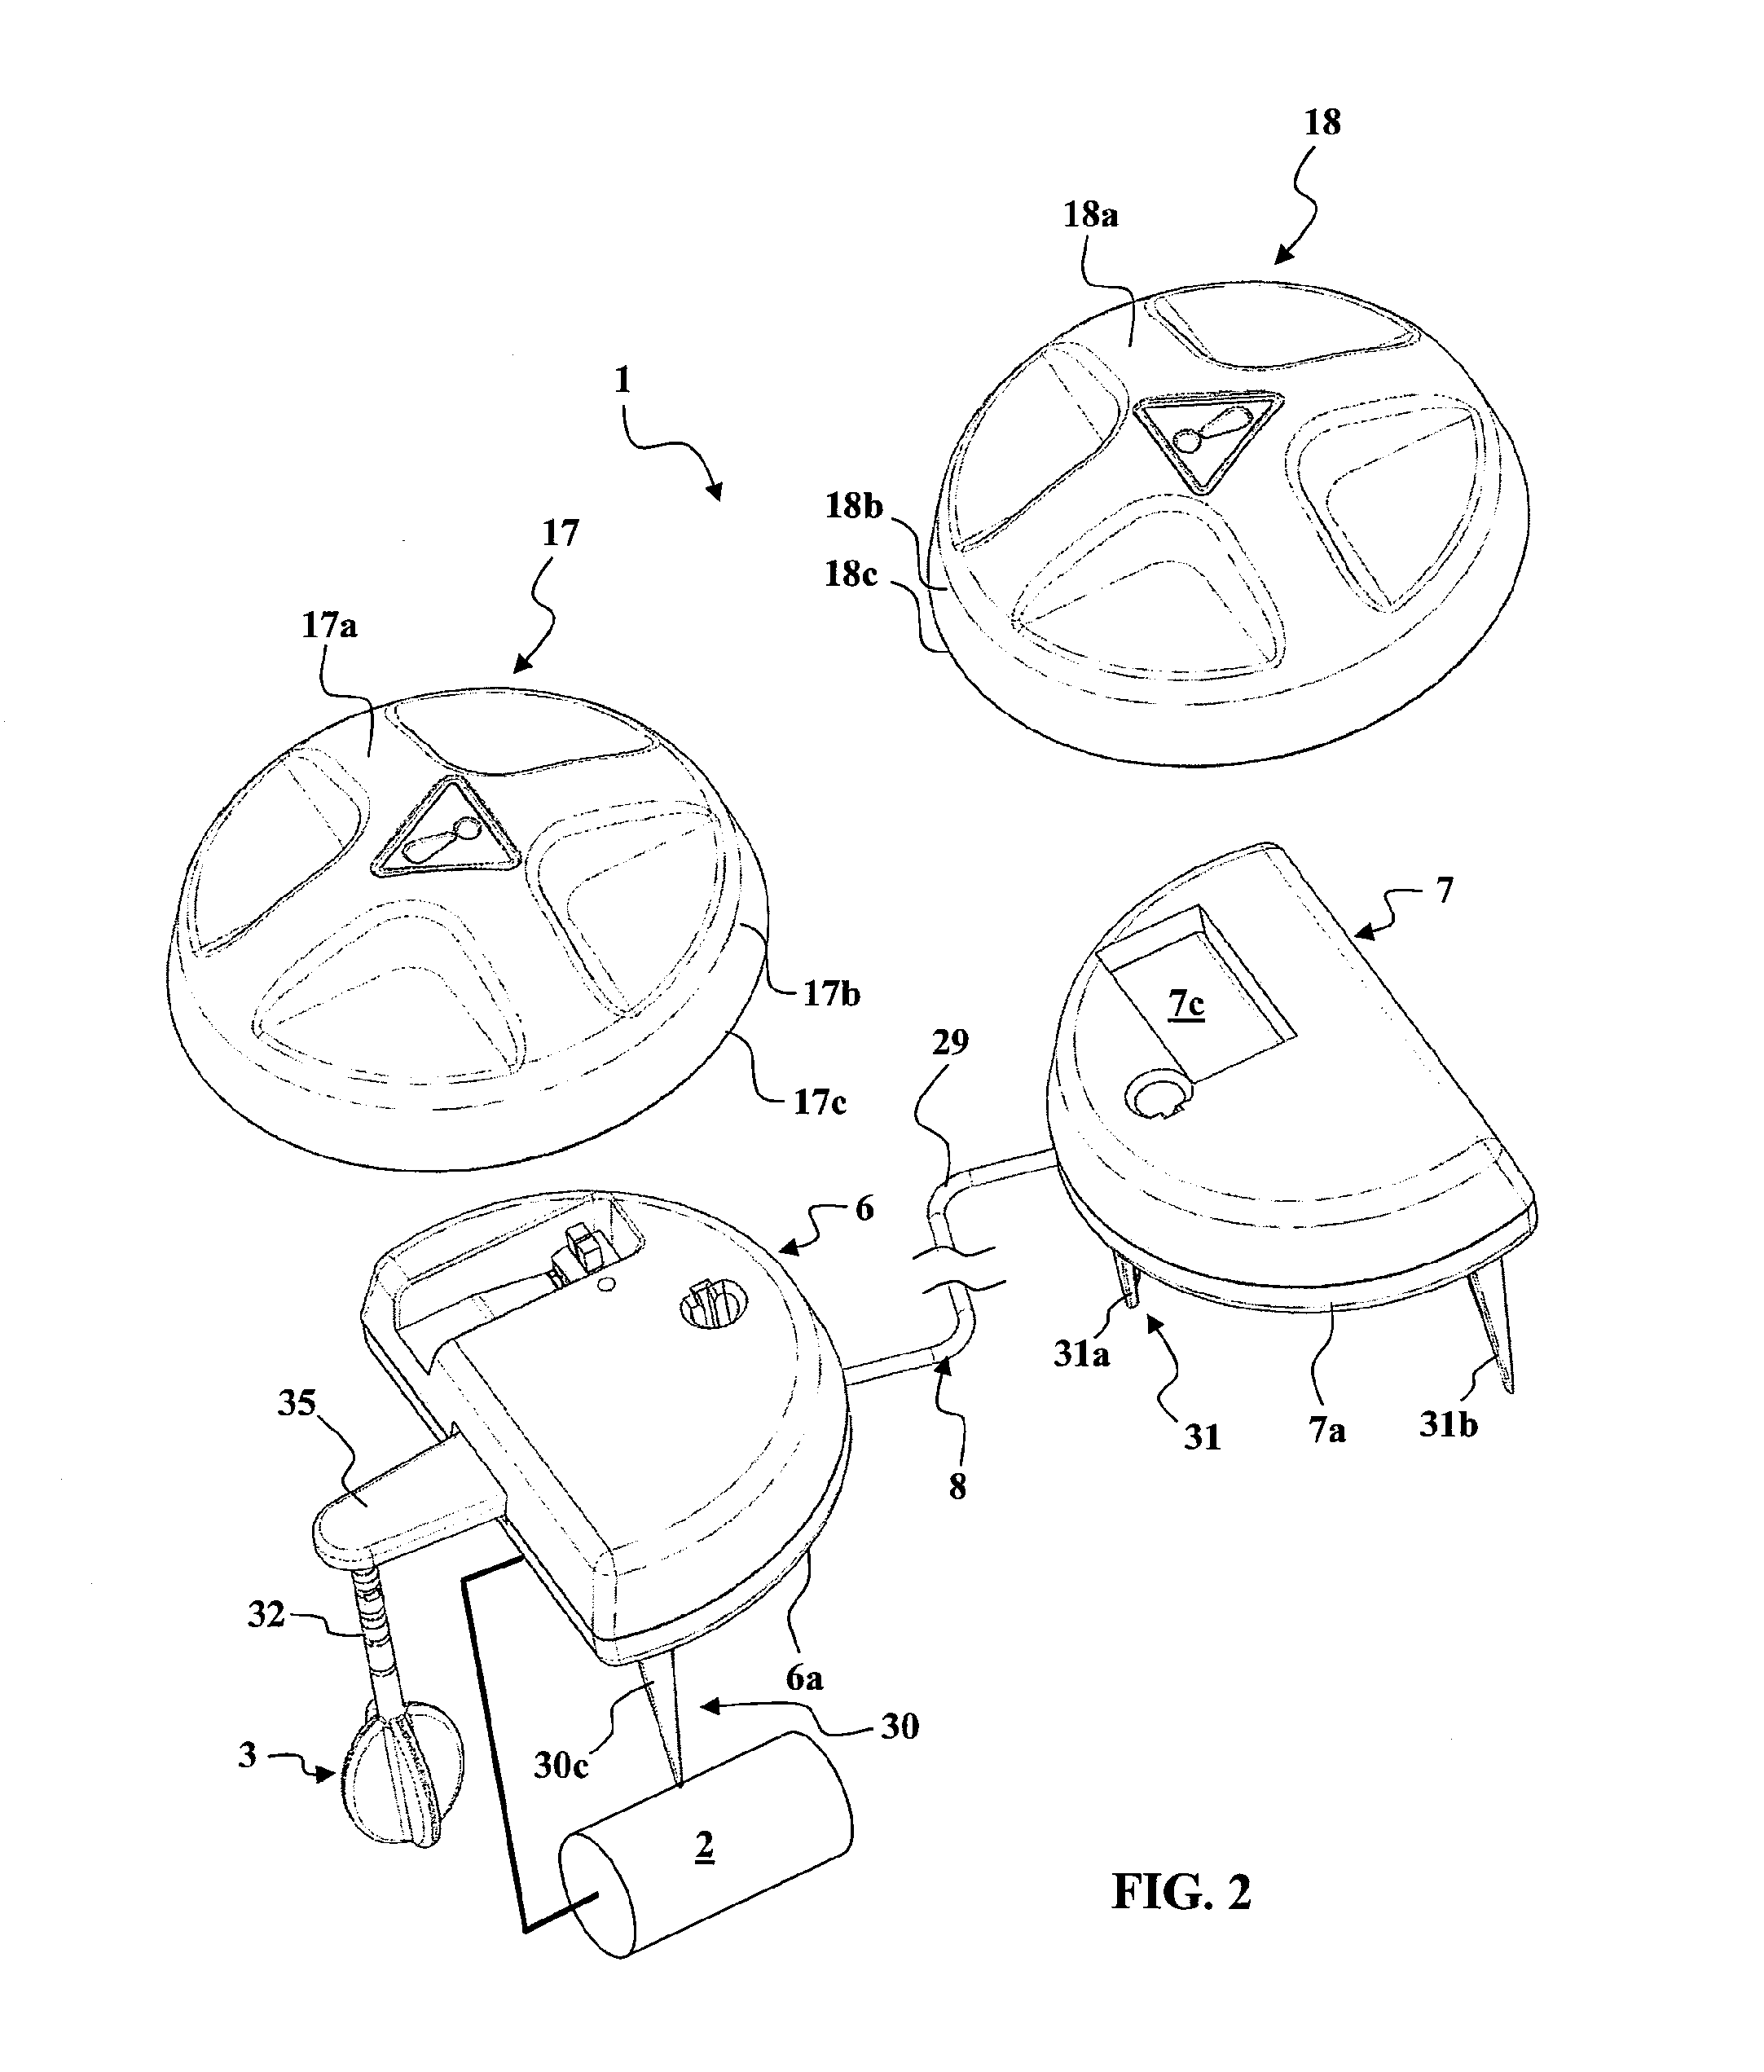 Pyrotechnic device with safe firing